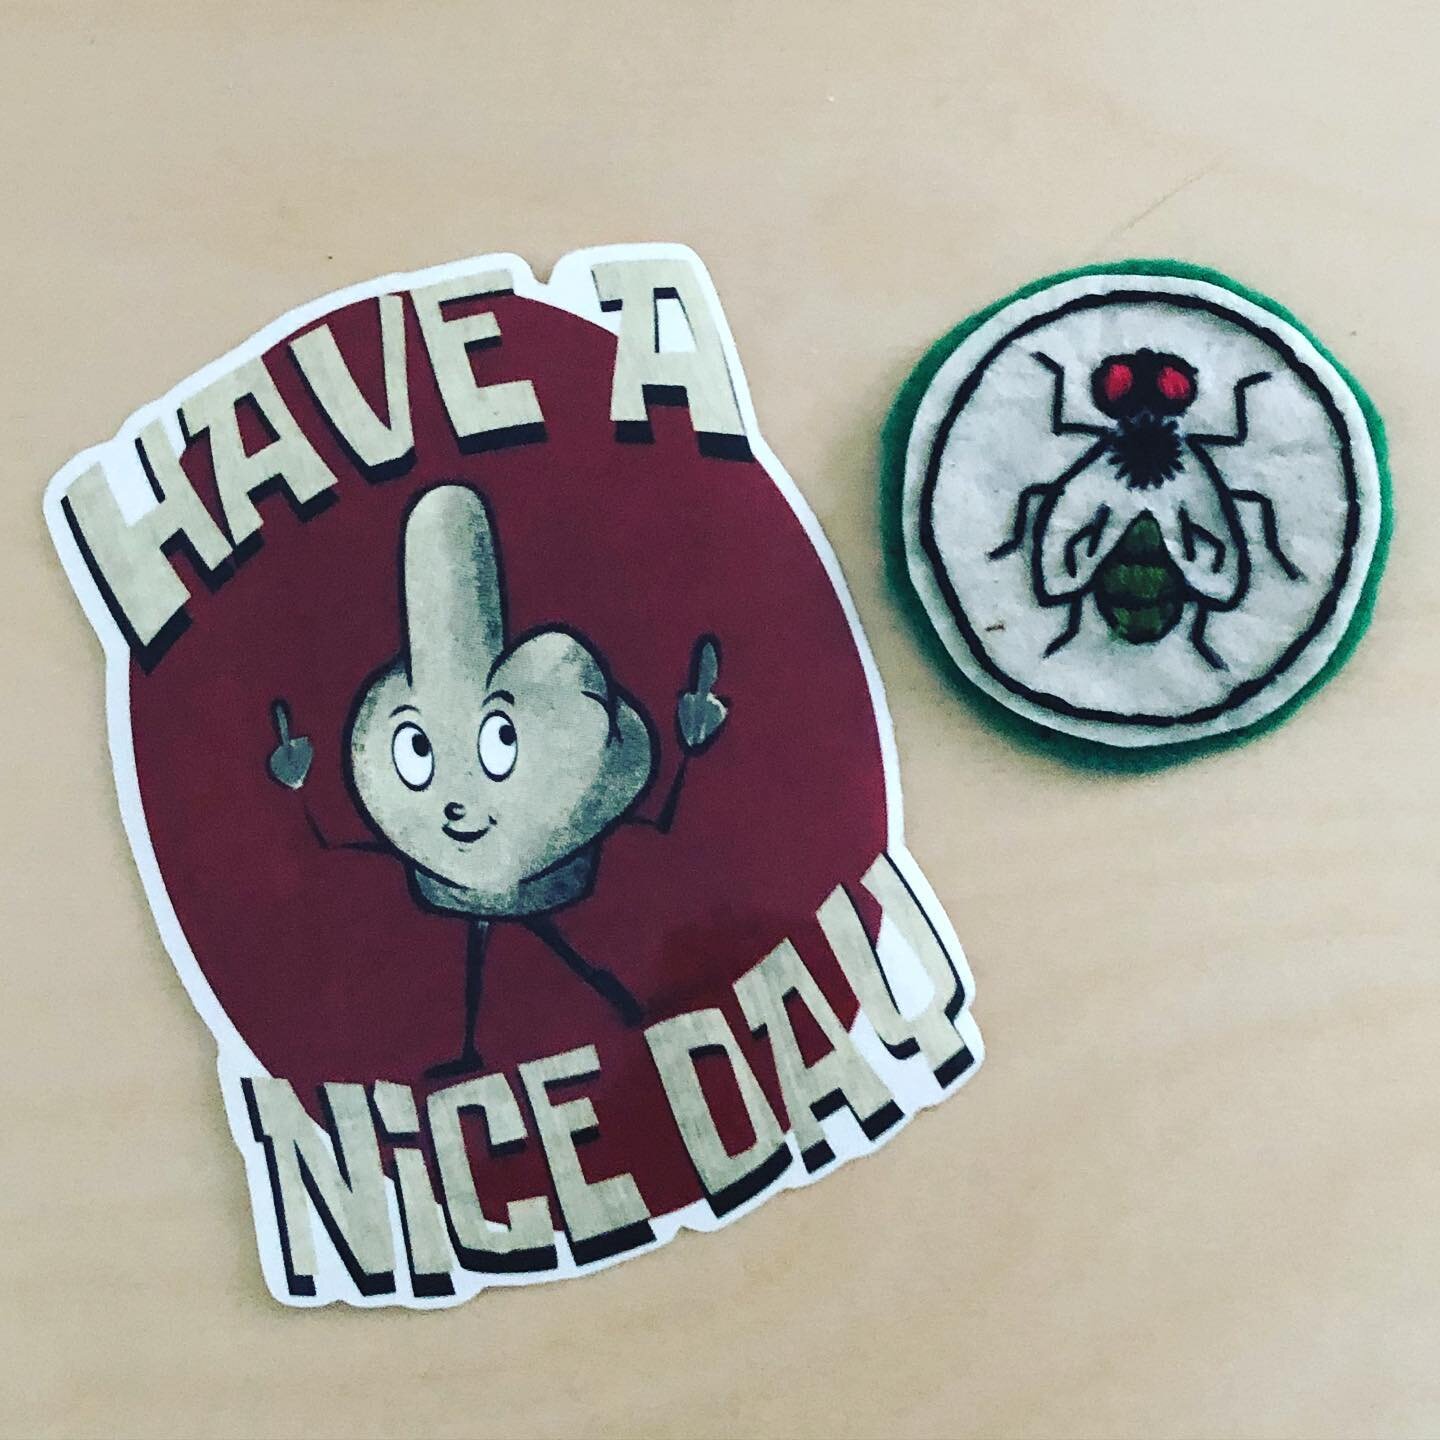 Love my new hand embroidered fly patch and sticker from @finks_and_weirdohs by my buddy @curtis_campbell #handembroidered #fink #fly #wierdohs